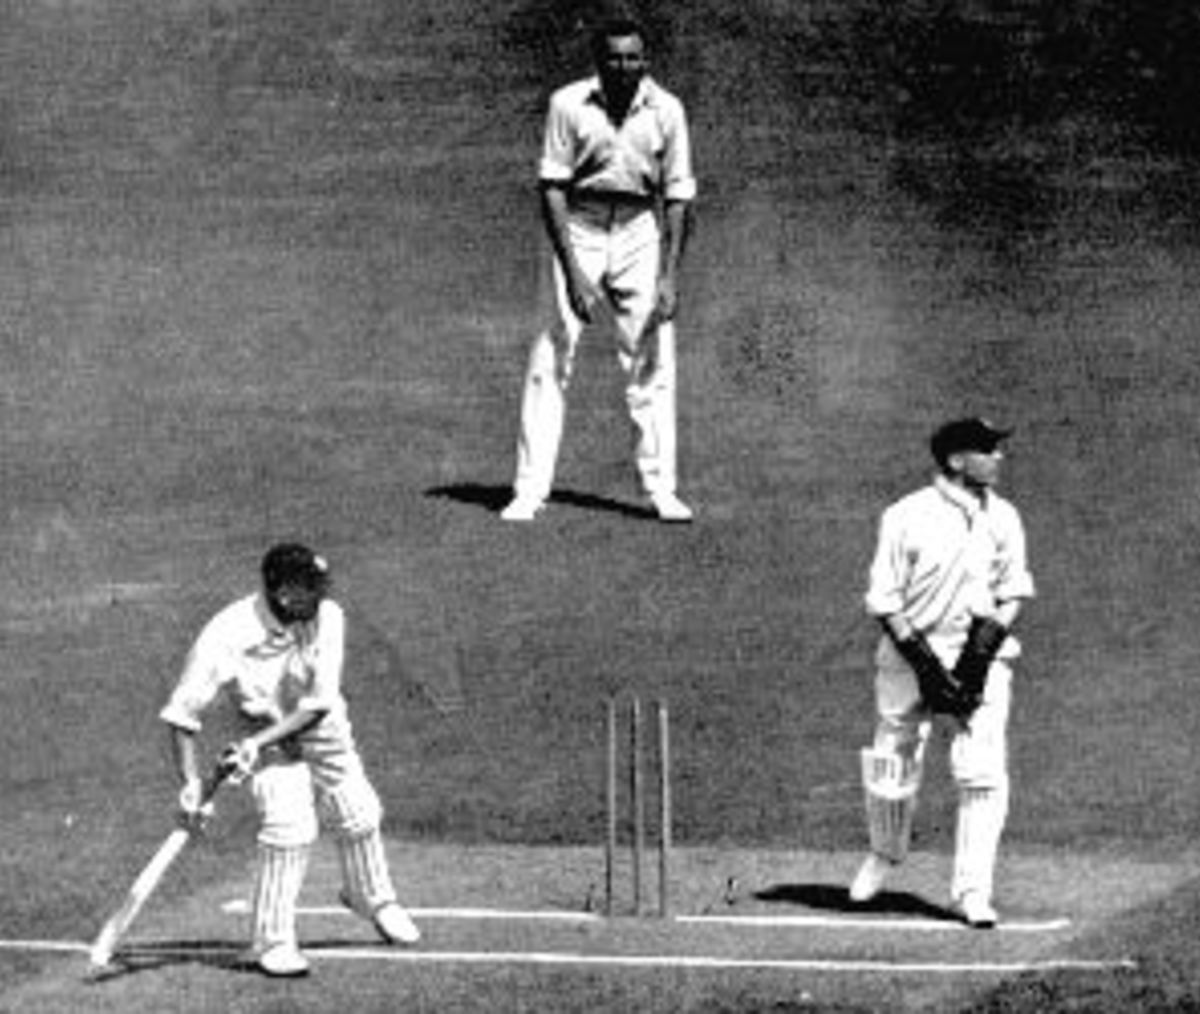 Australia v England, 1924-5. 4th Test, Hobbs stumped by Oldfield. Hobbs had lifted his foot for a second.